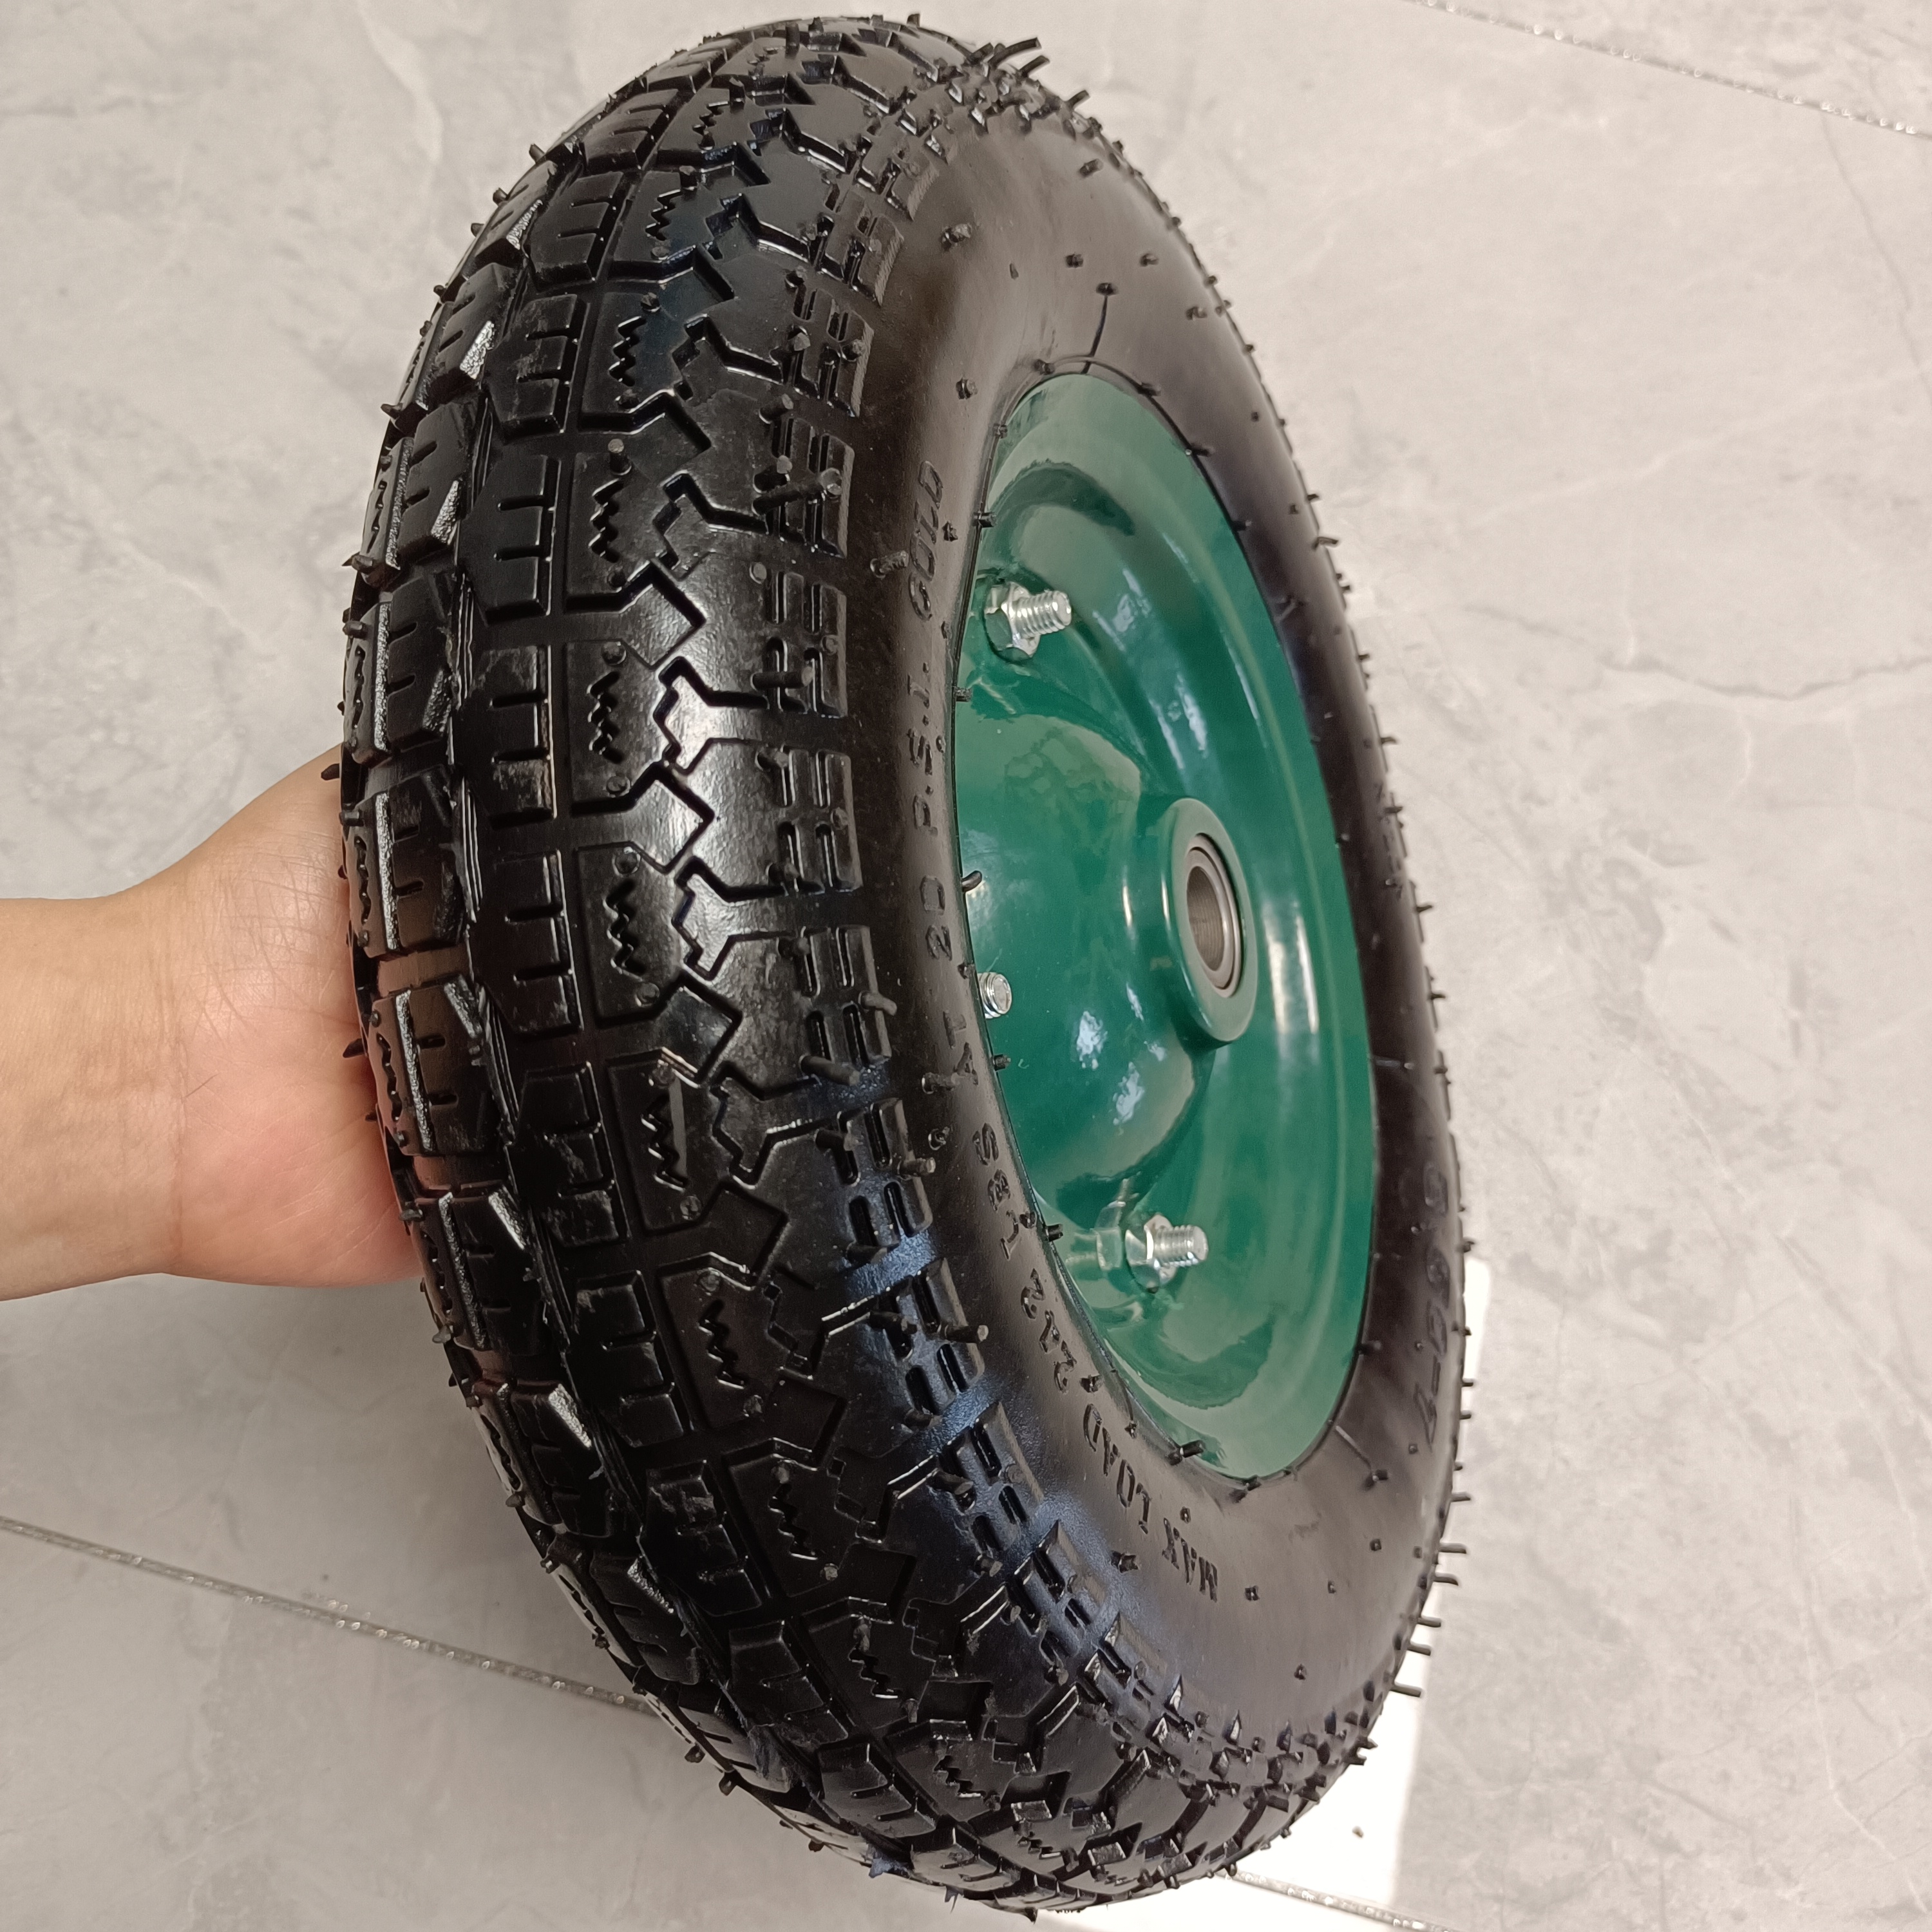 4.80/4.00-8 Pneumatic Rubber Wheel with Plastic Rim - China Rubber